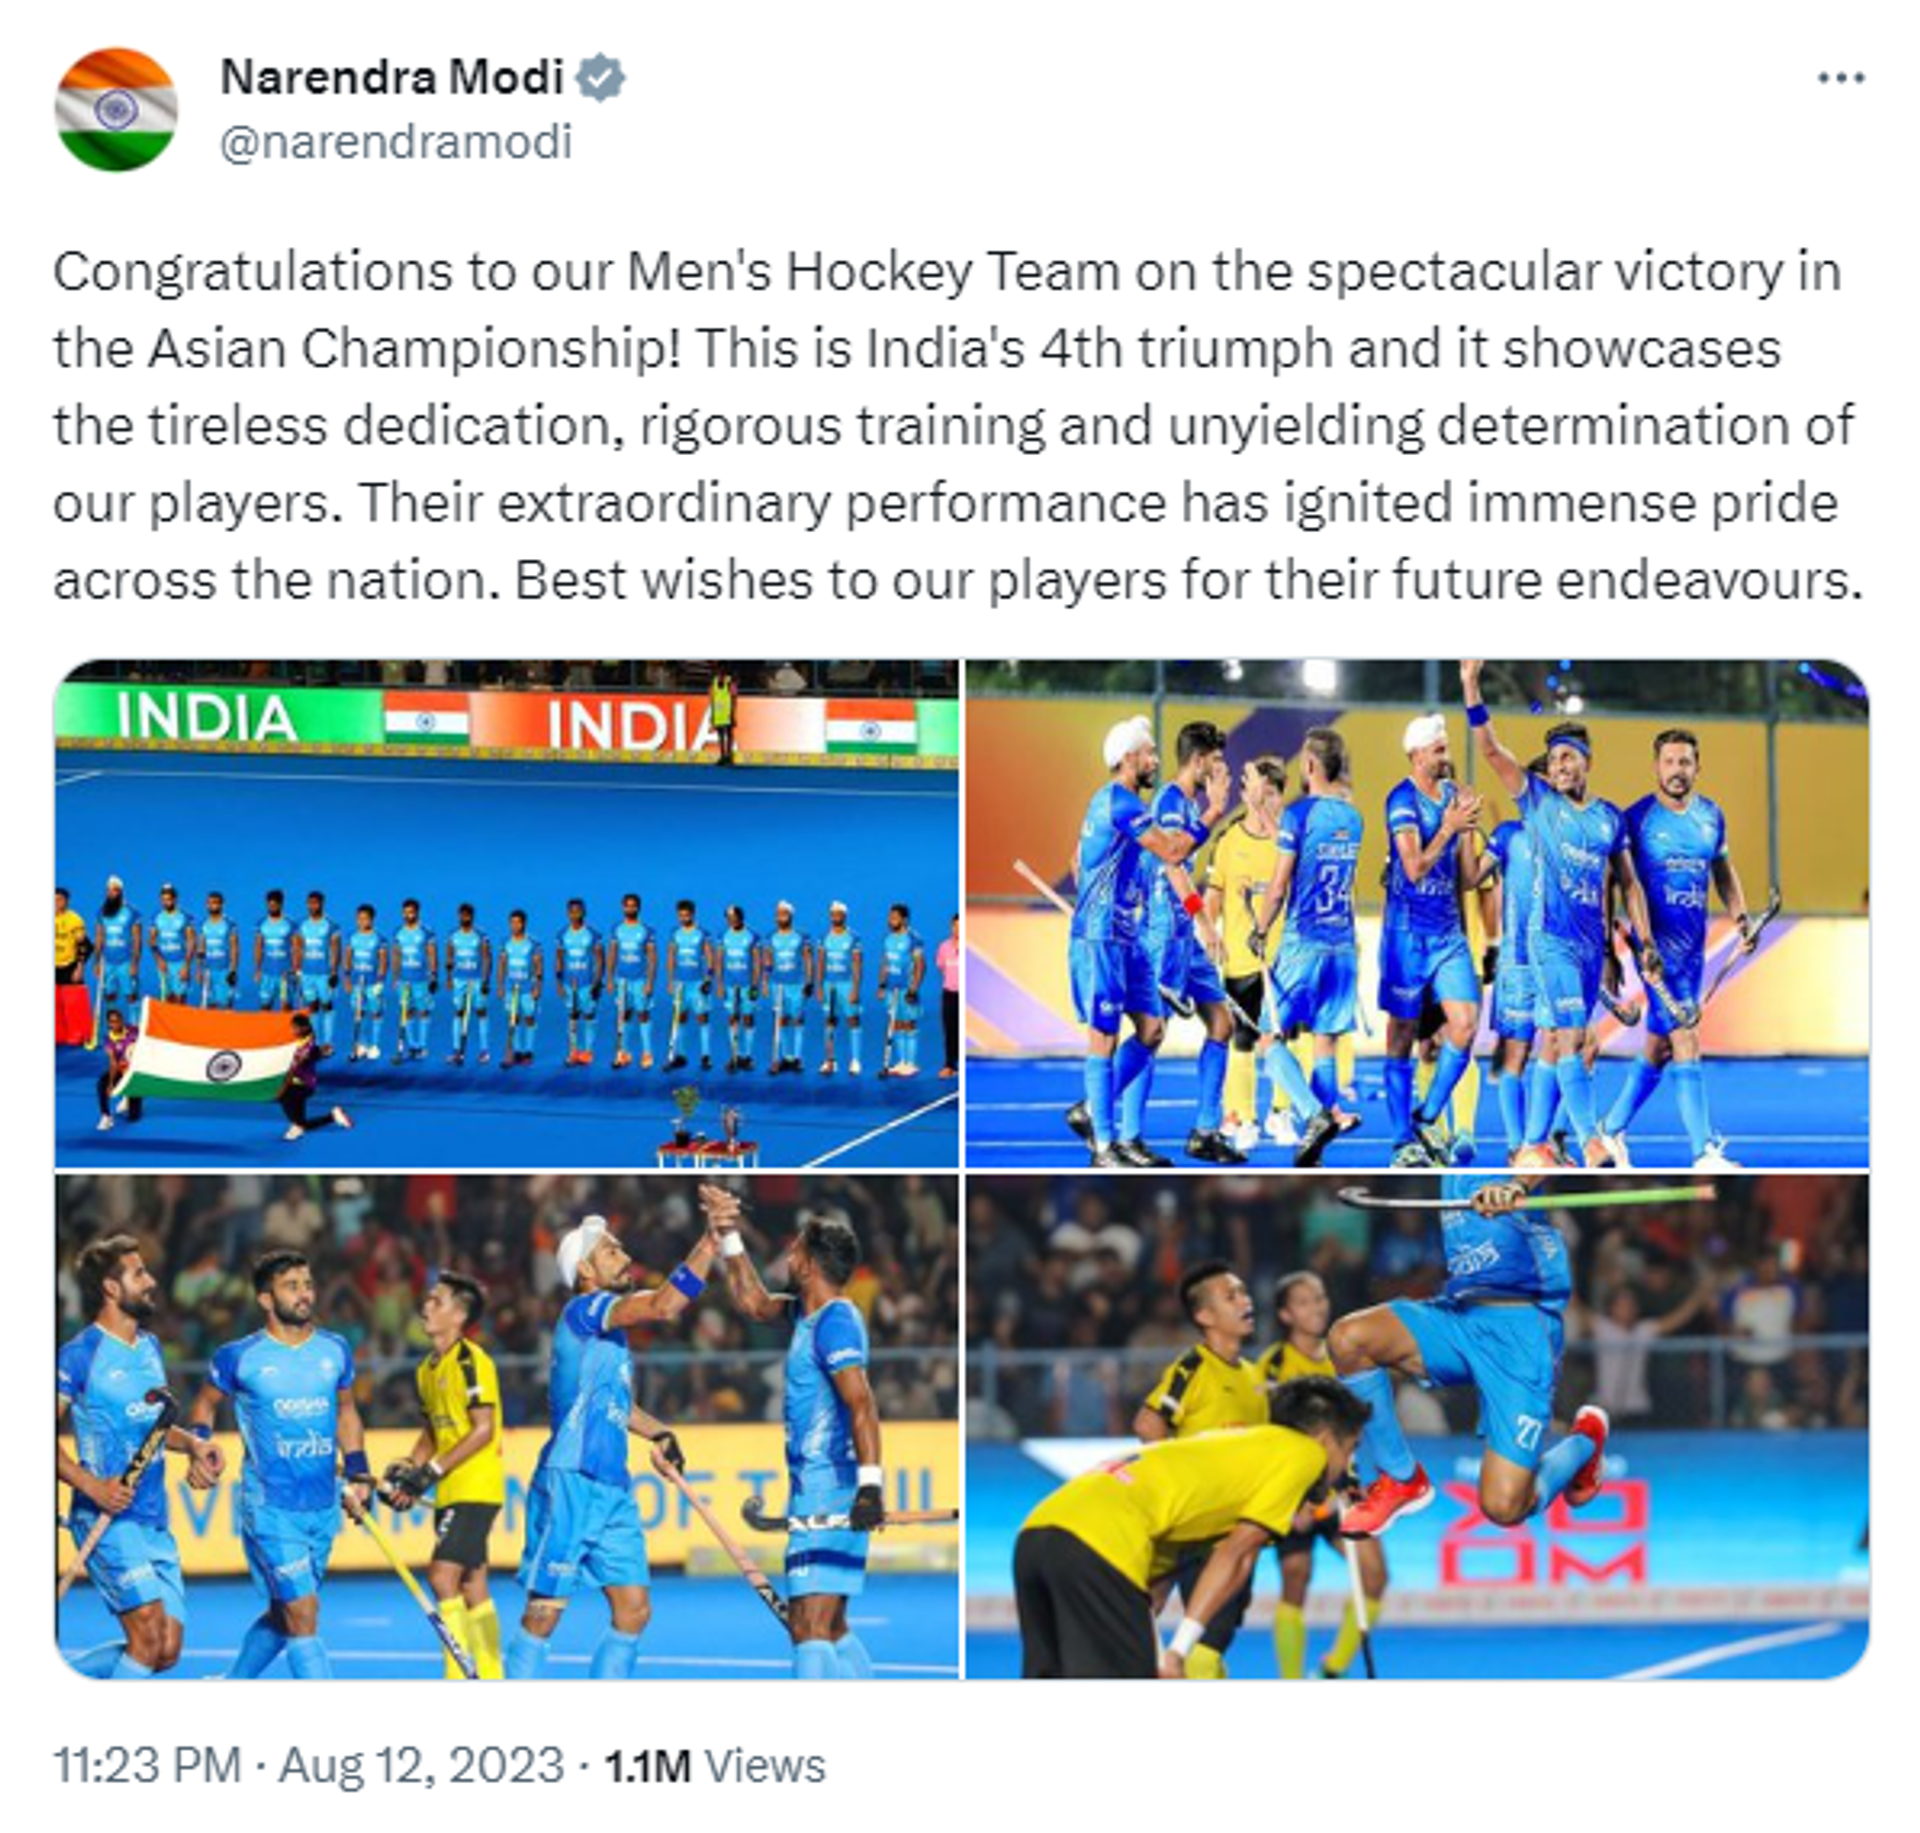 Narendra Modi Congratulates Indian Hockey Team for Winning Asian Championship Trophy for 4th Time - Sputnik India, 1920, 13.08.2023